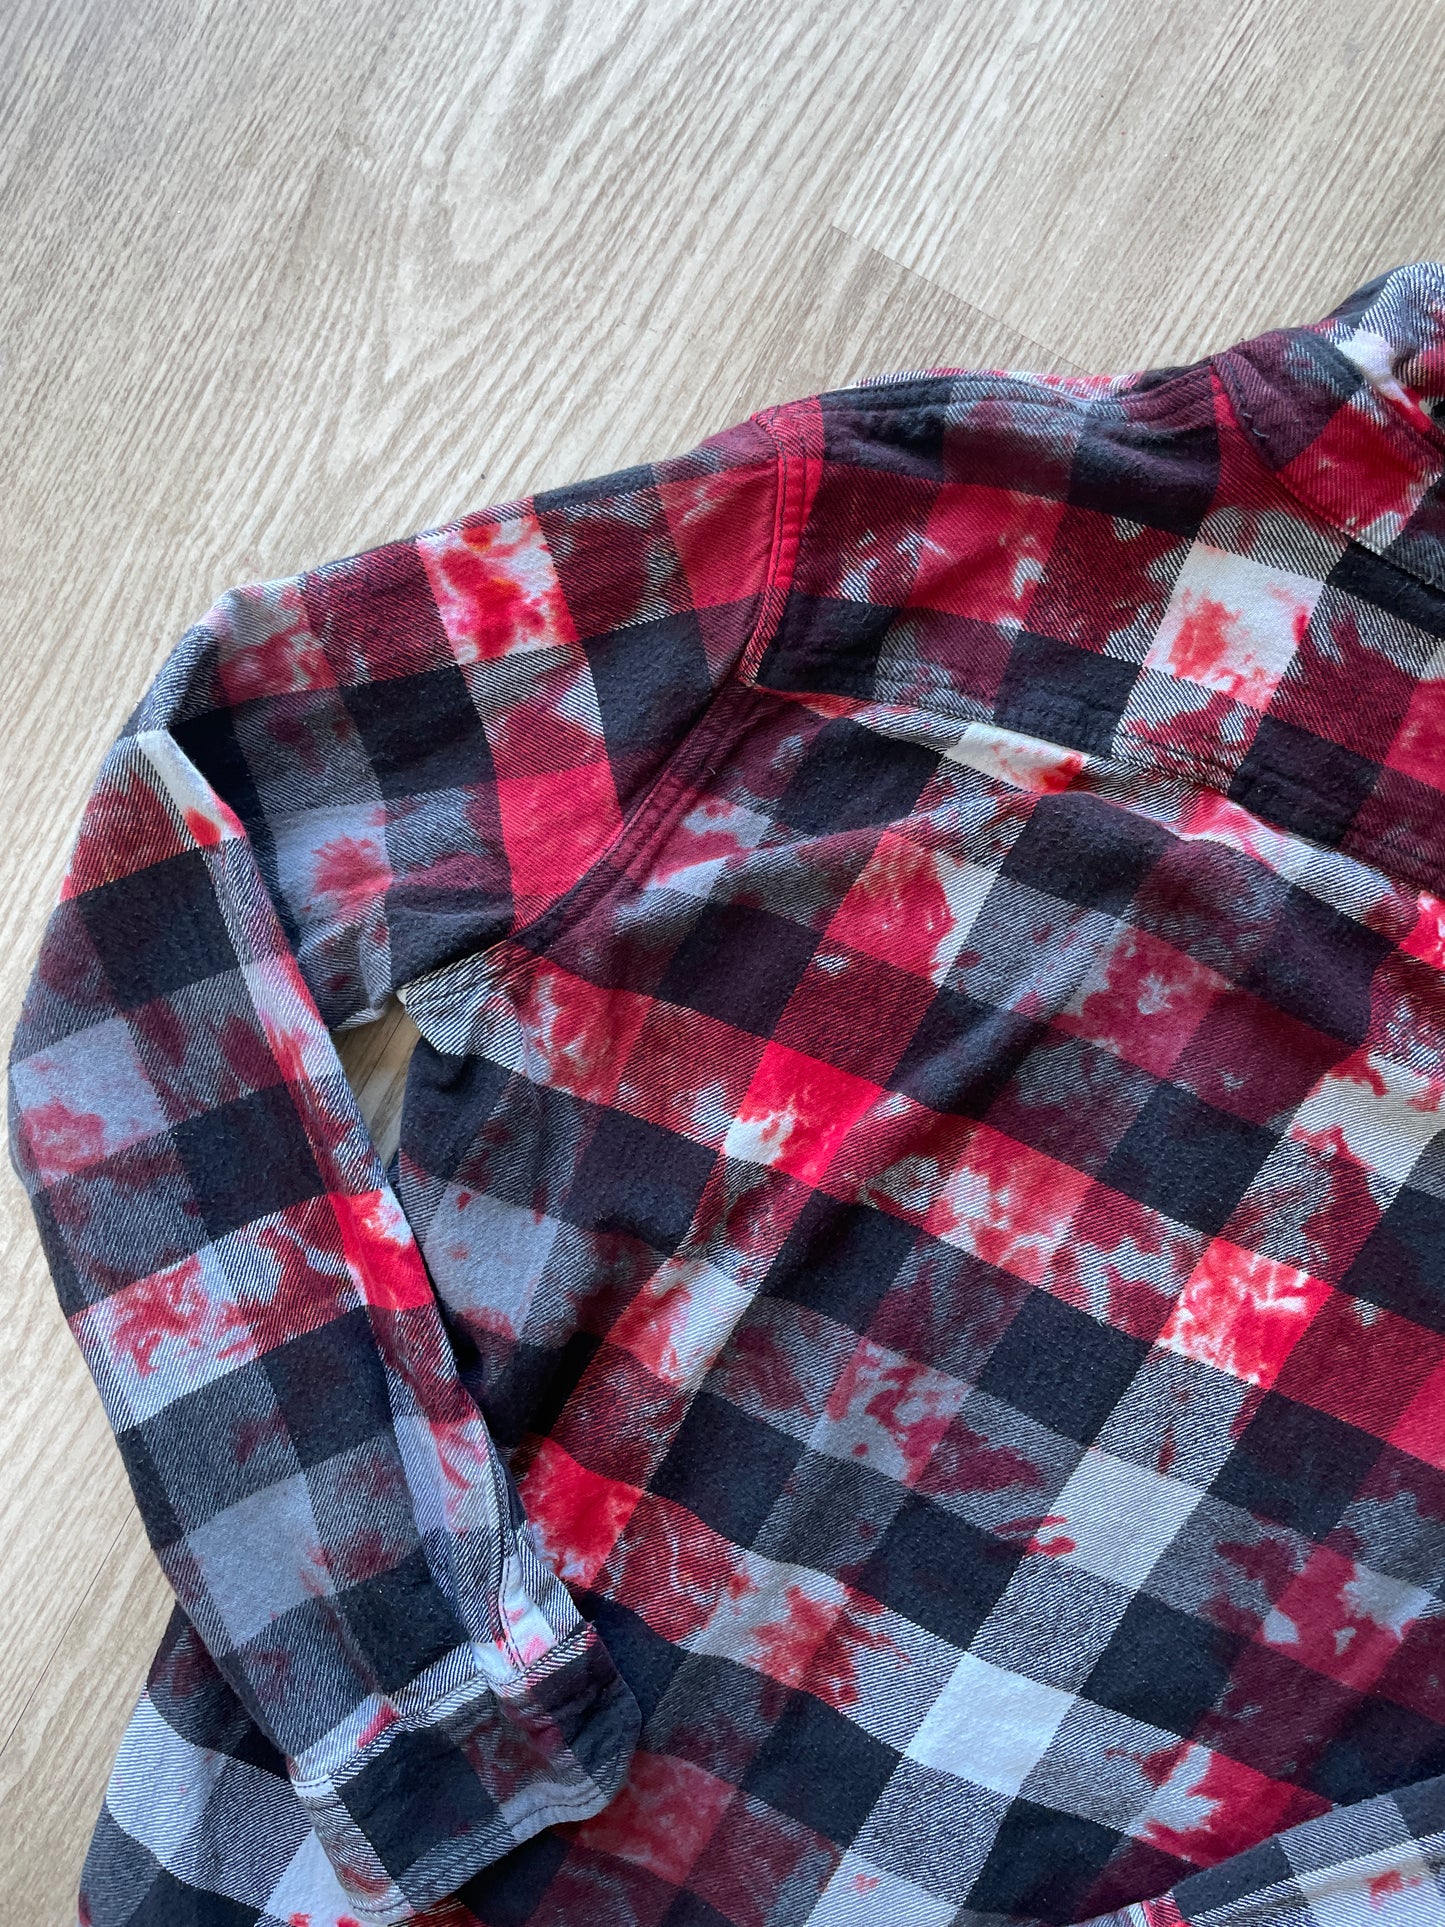 MEDIUM Men’s American Eagle Black, White, and Red Handmade Tie Dye Flannel Shirt | One-Of-a-Kind Upcycled Long Sleeve